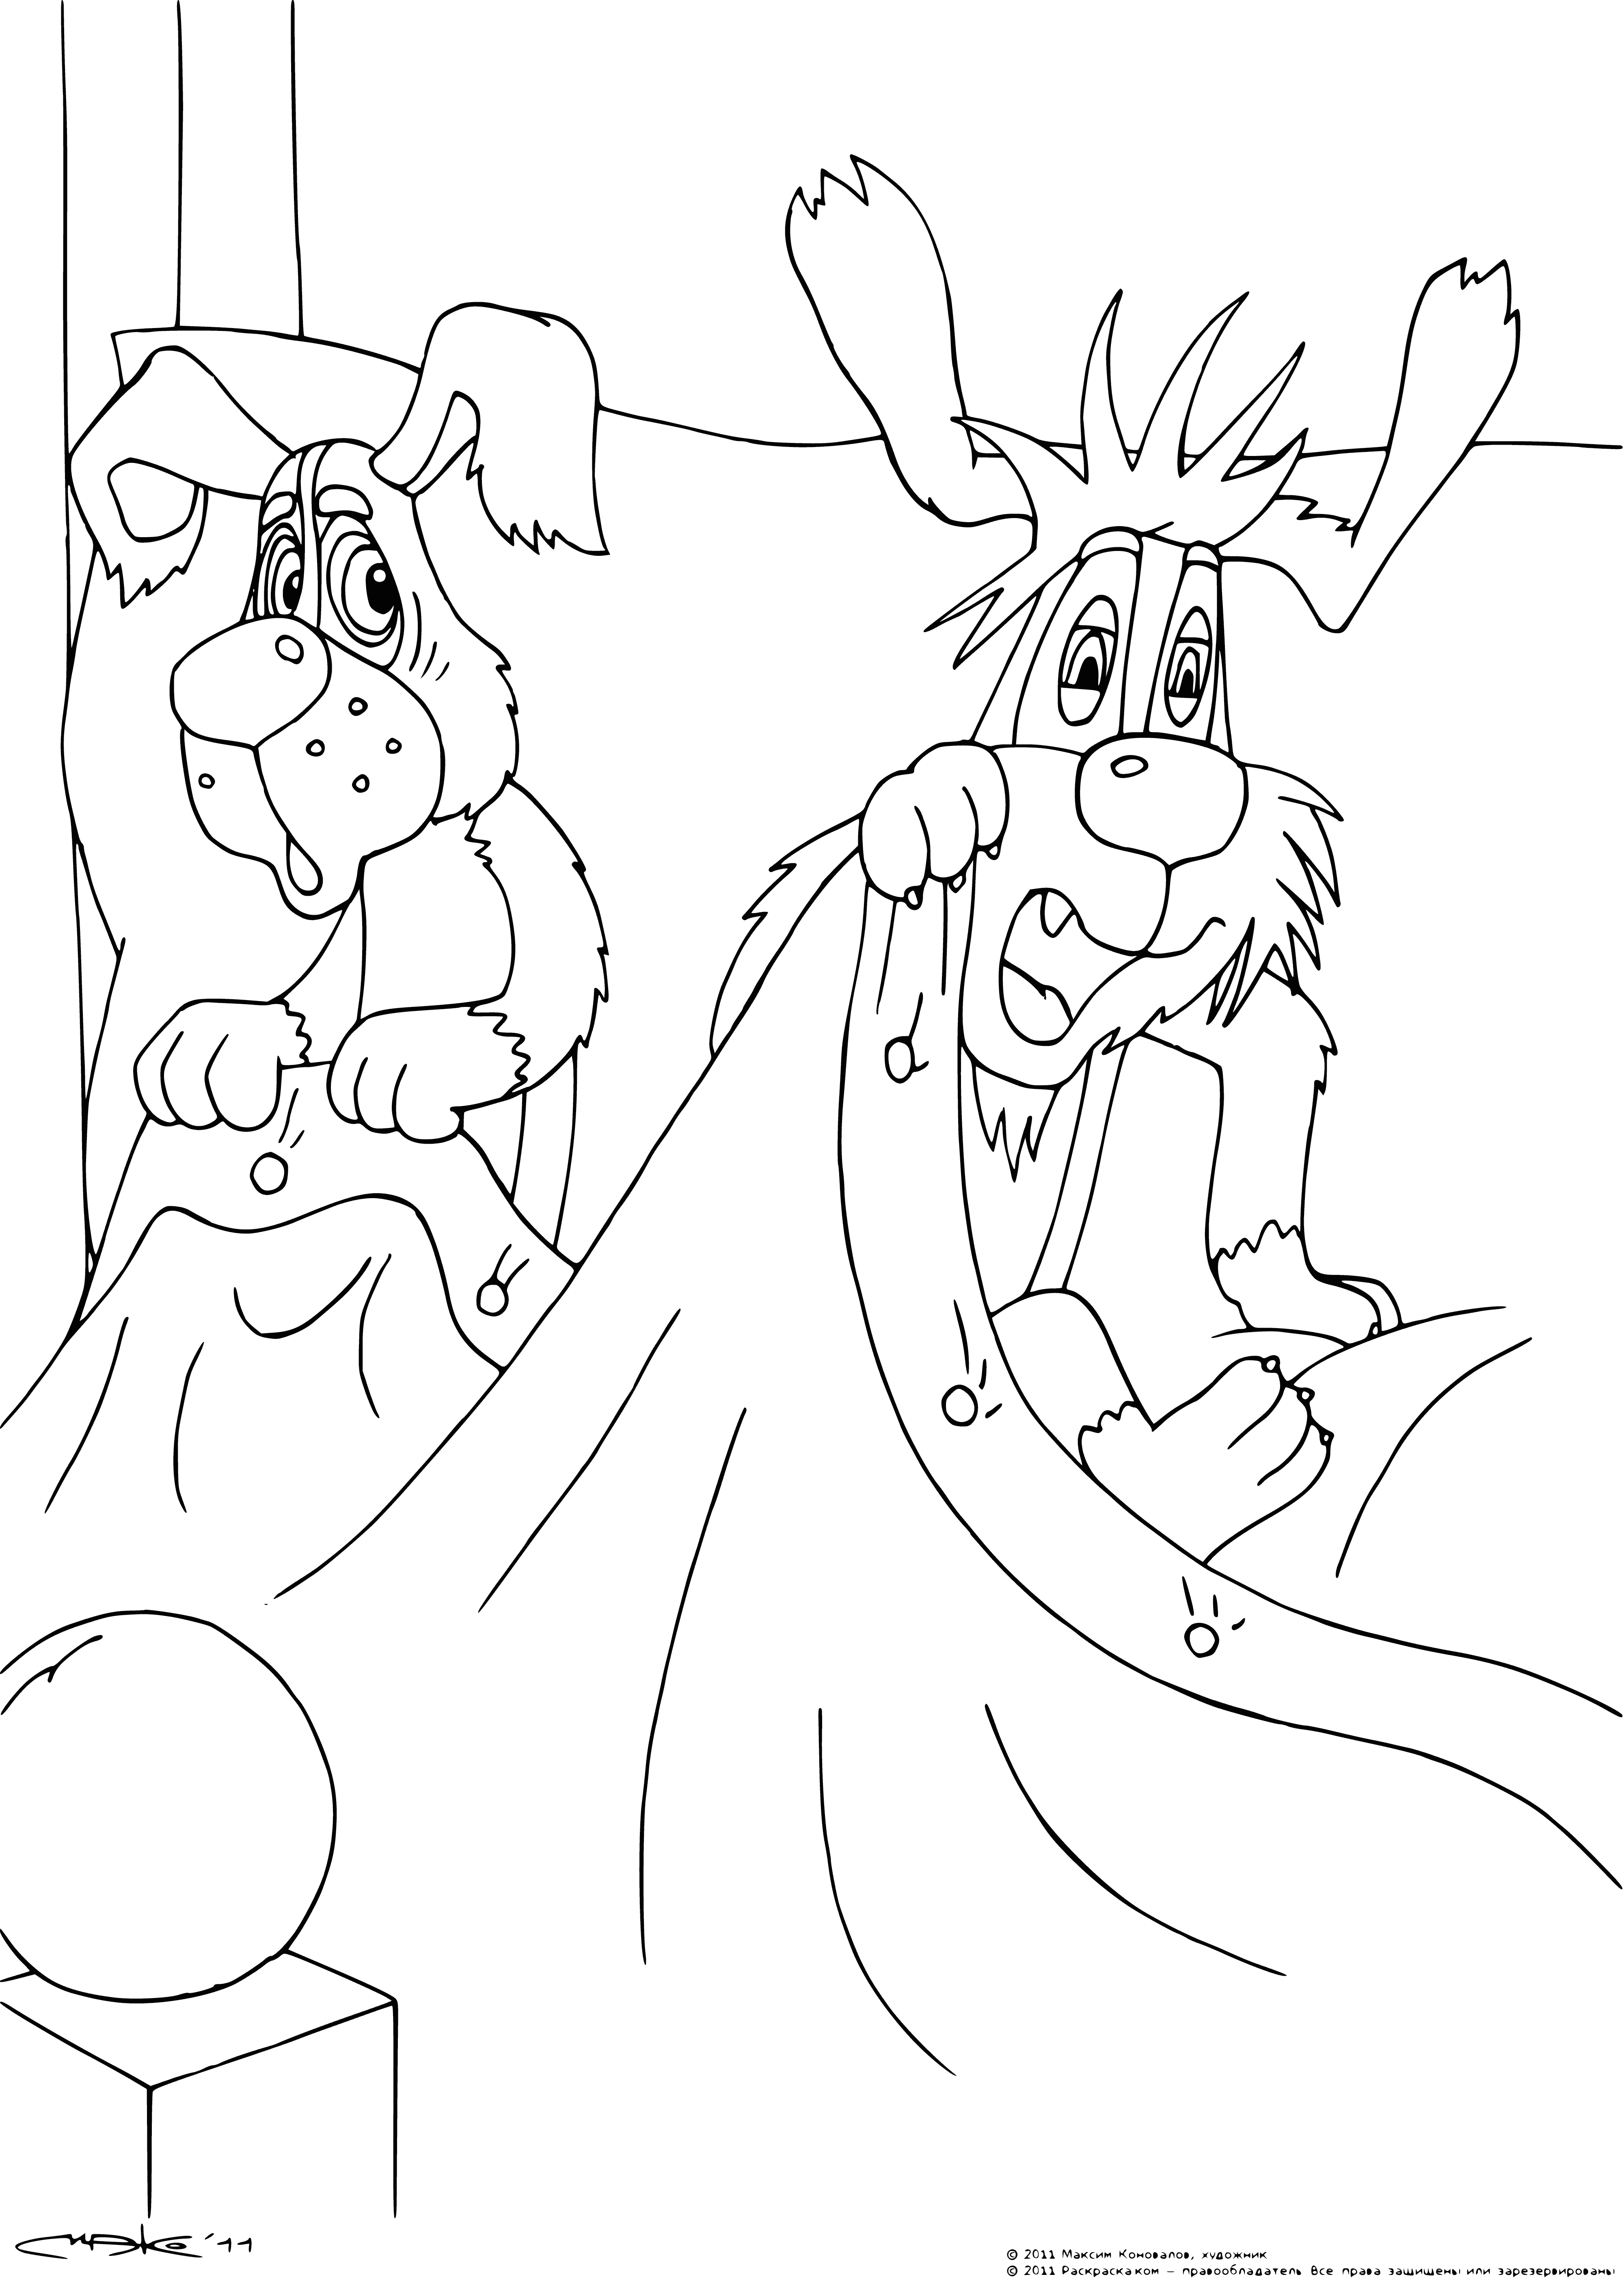 coloring page: Three dogs in a bed panting, one standing, one sitting and one lying down.